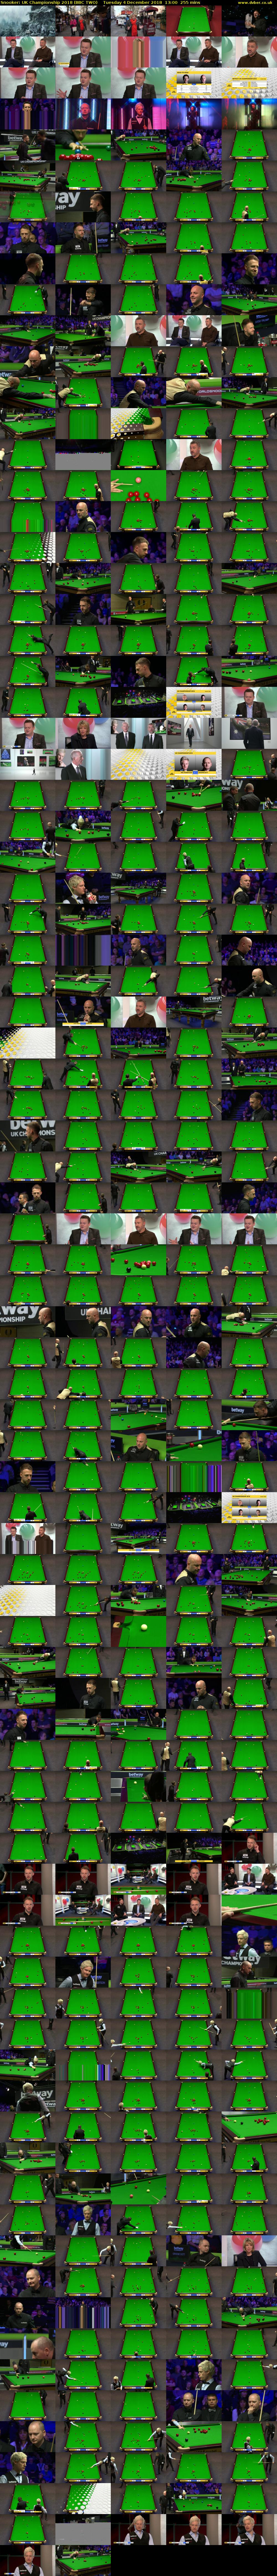 Snooker: UK Championship 2018 (BBC TWO) Tuesday 4 December 2018 13:00 - 17:15